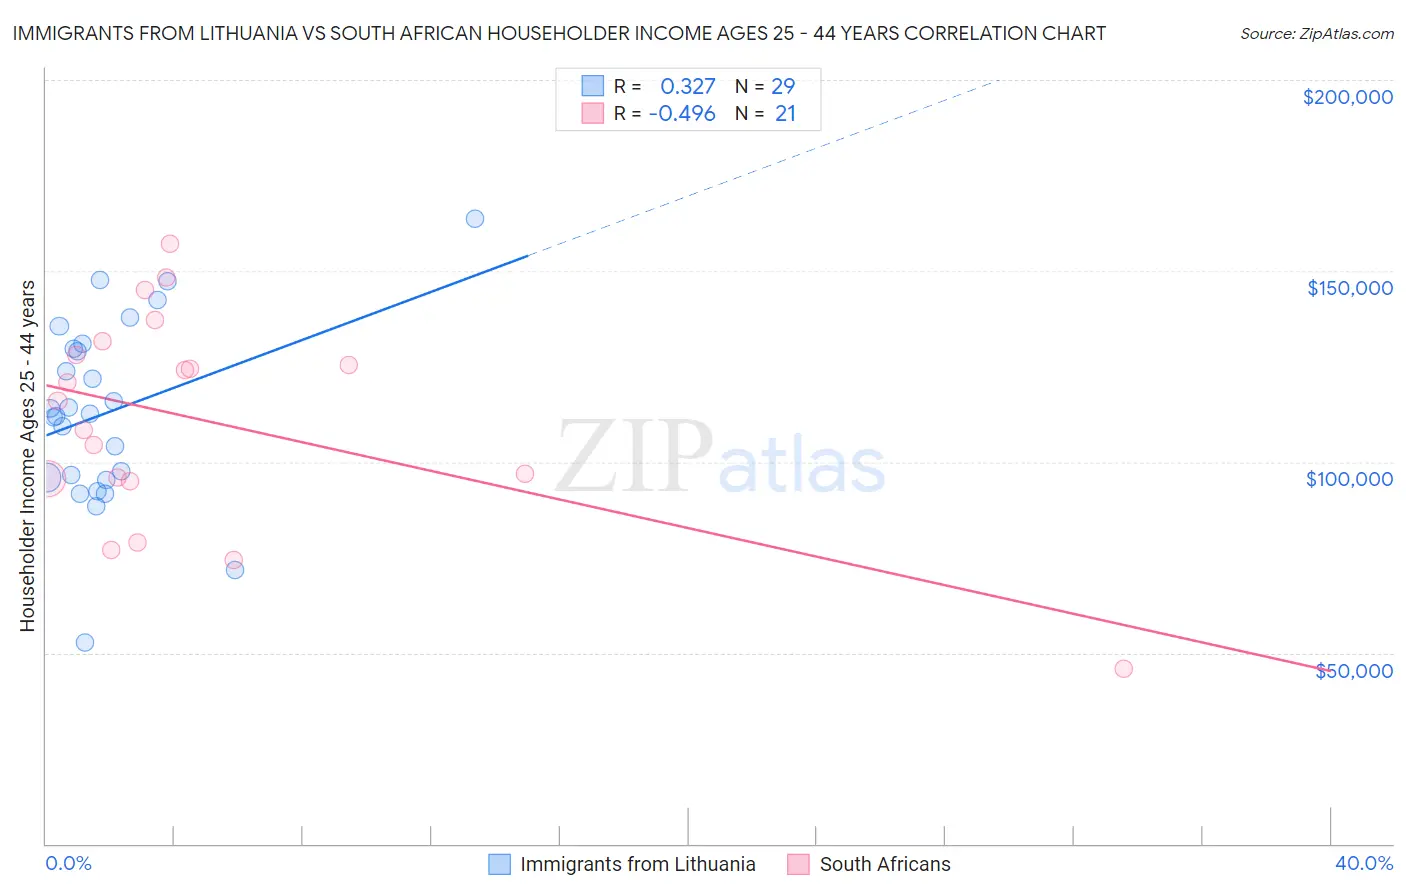 Immigrants from Lithuania vs South African Householder Income Ages 25 - 44 years